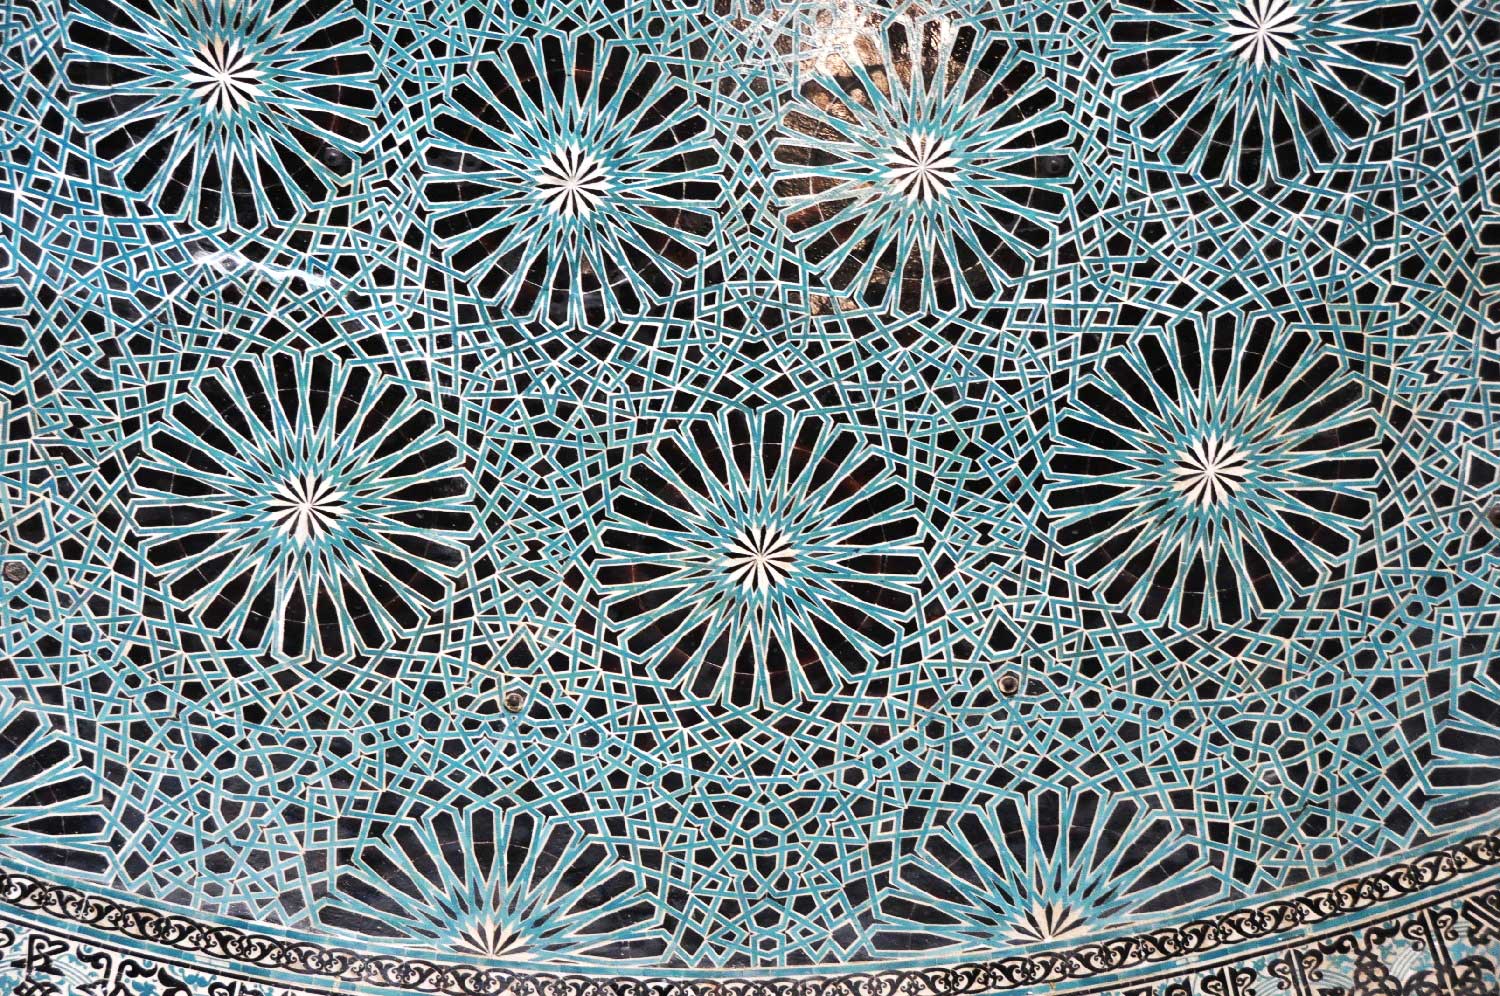 Detail of main tile pattern inside the dome